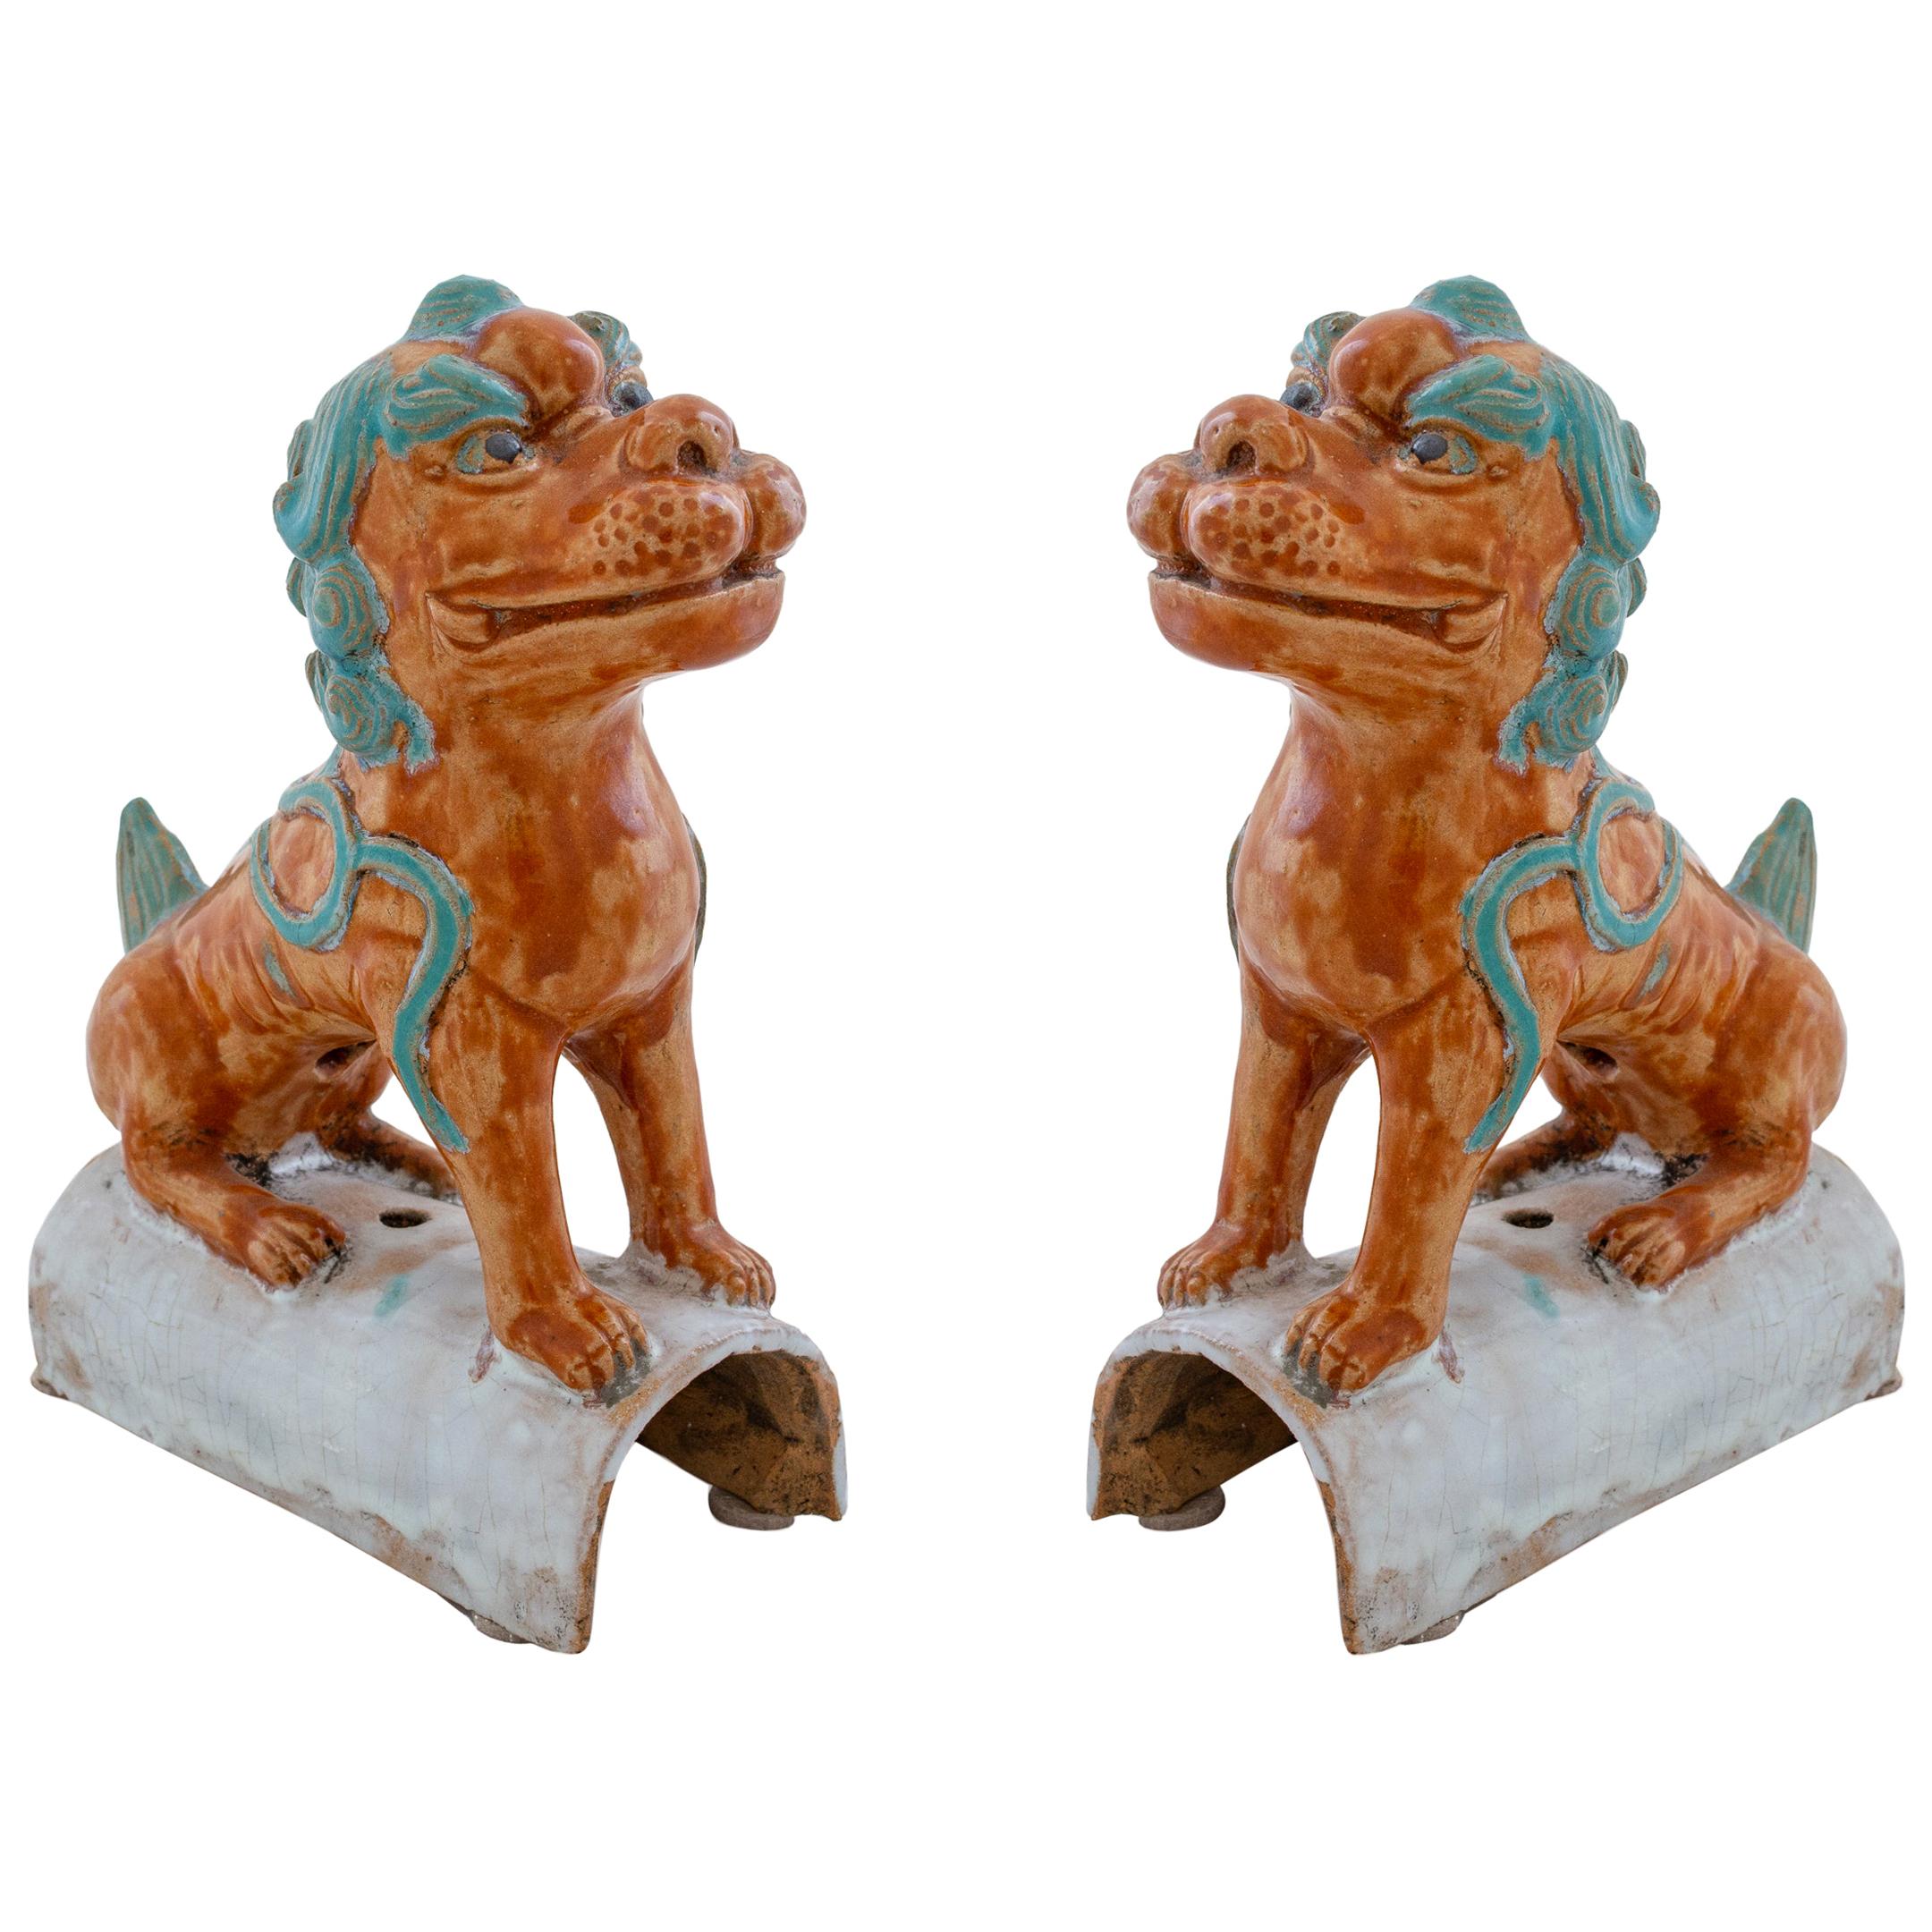 Pair of Colorful Chinese Terracotta Roof Tiles